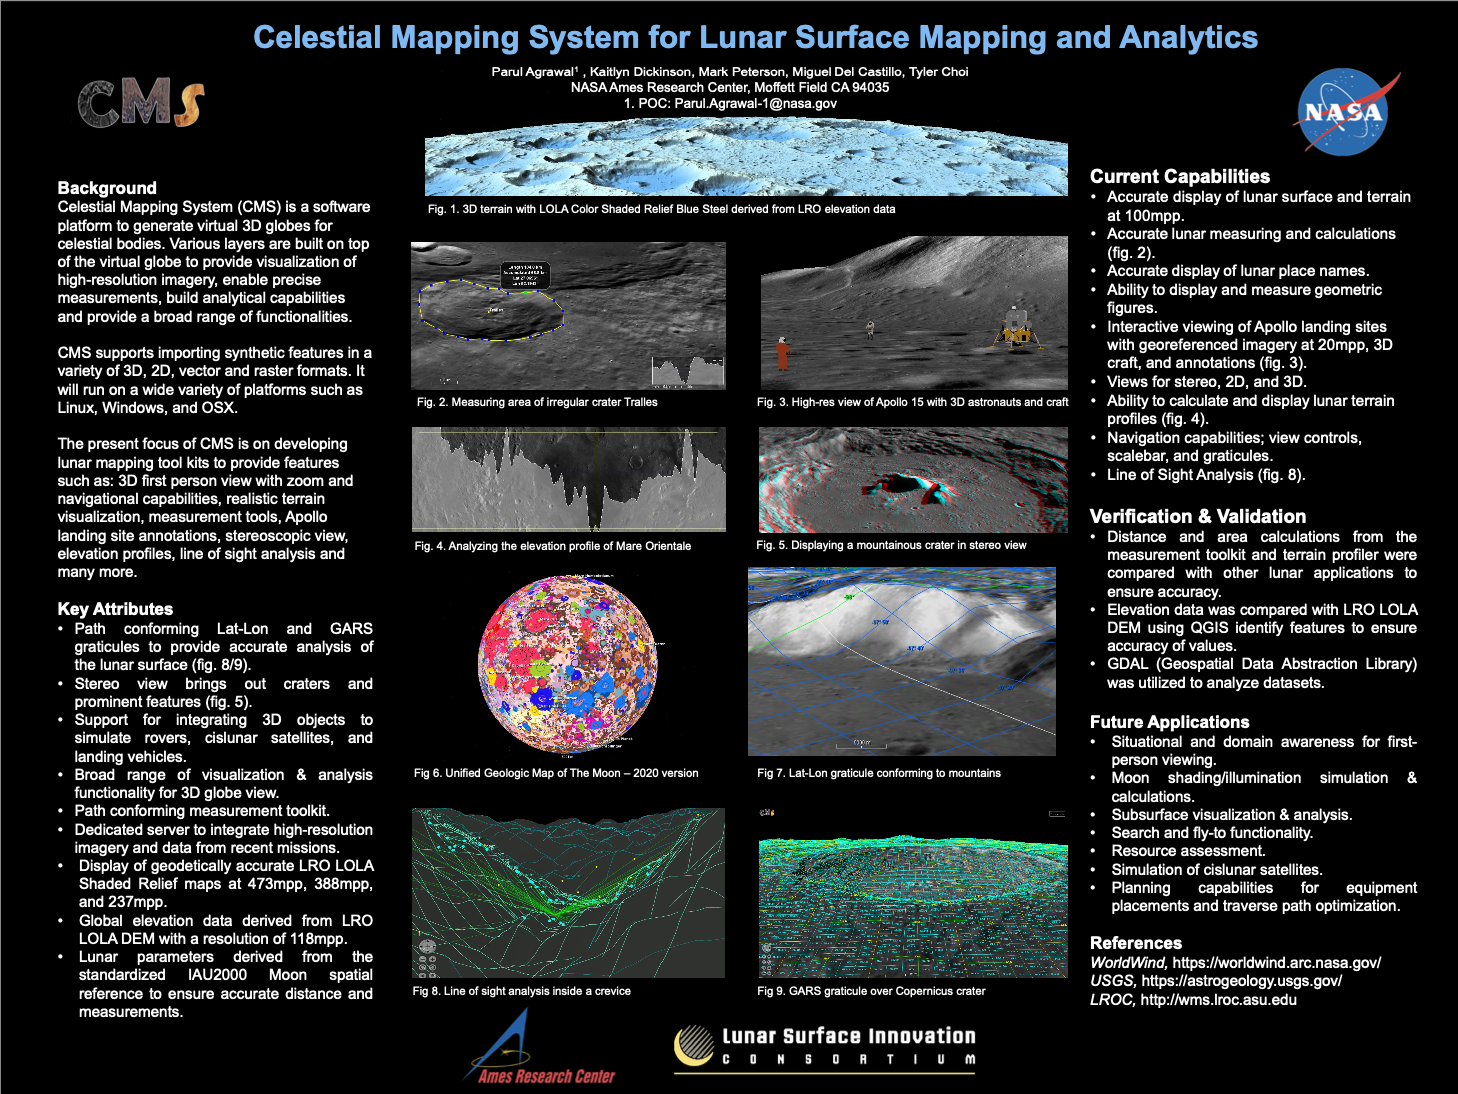 Celestial Mapping System for Lunar Surface Mapping and Analytics Poster